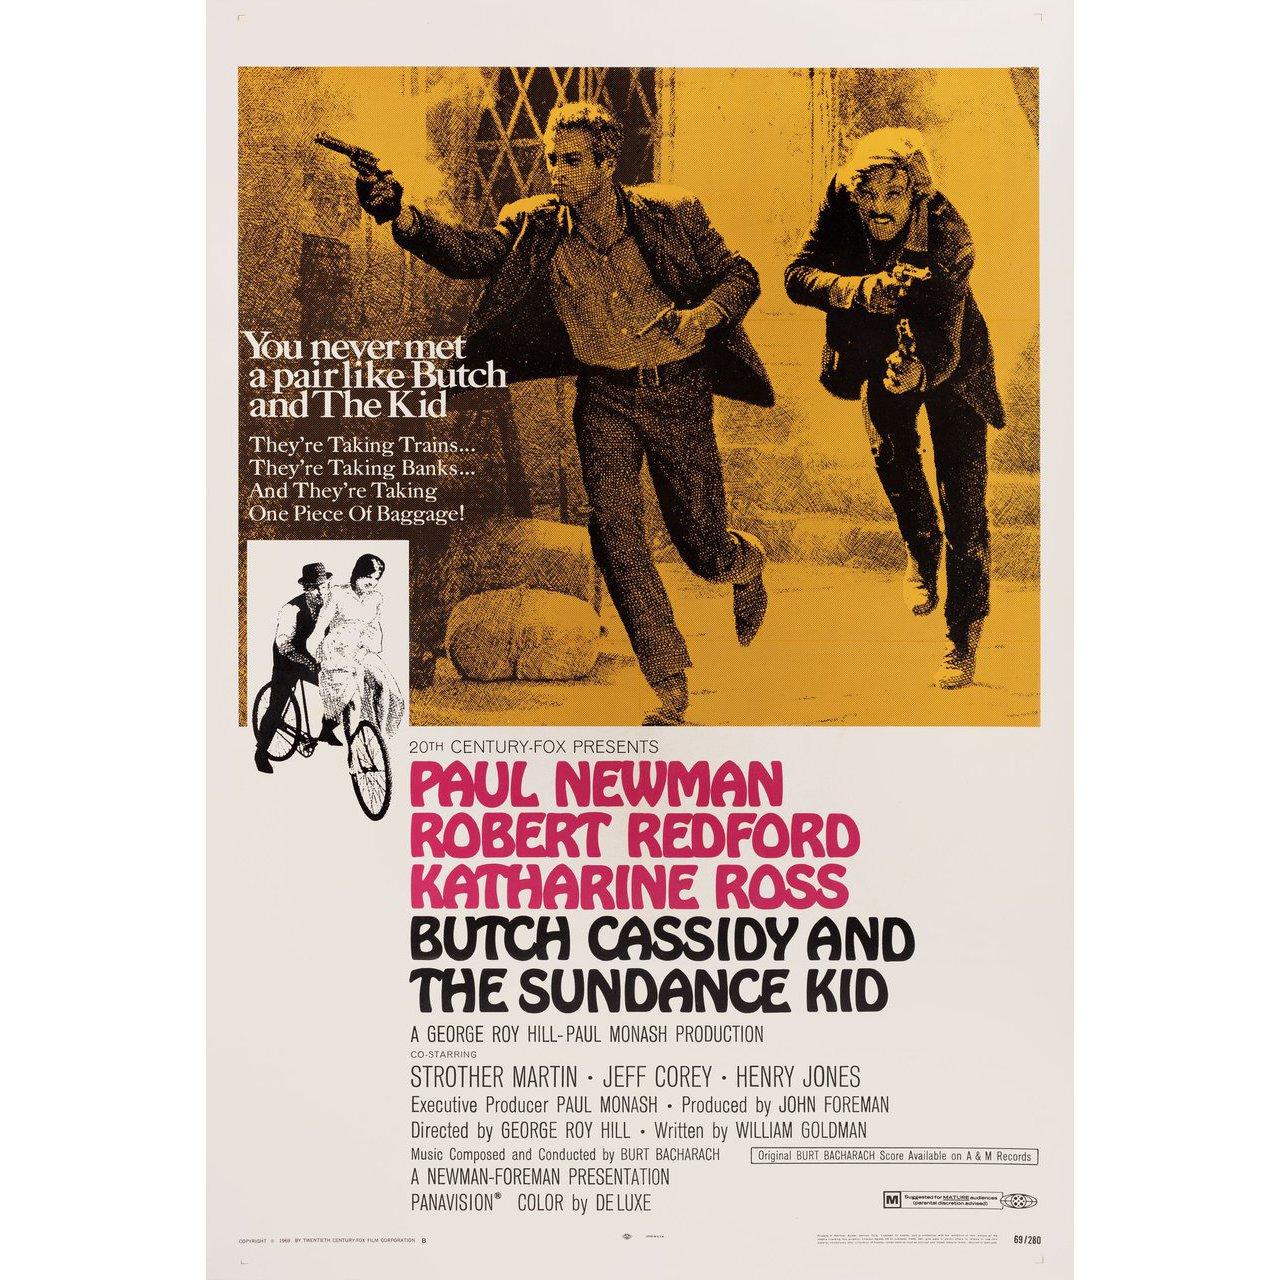 Original 1969 U.S. one sheet poster by Tom Beauvais for the film Butch Cassidy and the Sundance Kid directed by George Roy Hill with Paul Newman / Robert Redford / Katharine Ross / Strother Martin. Fine condition, linen-backed. This poster has been